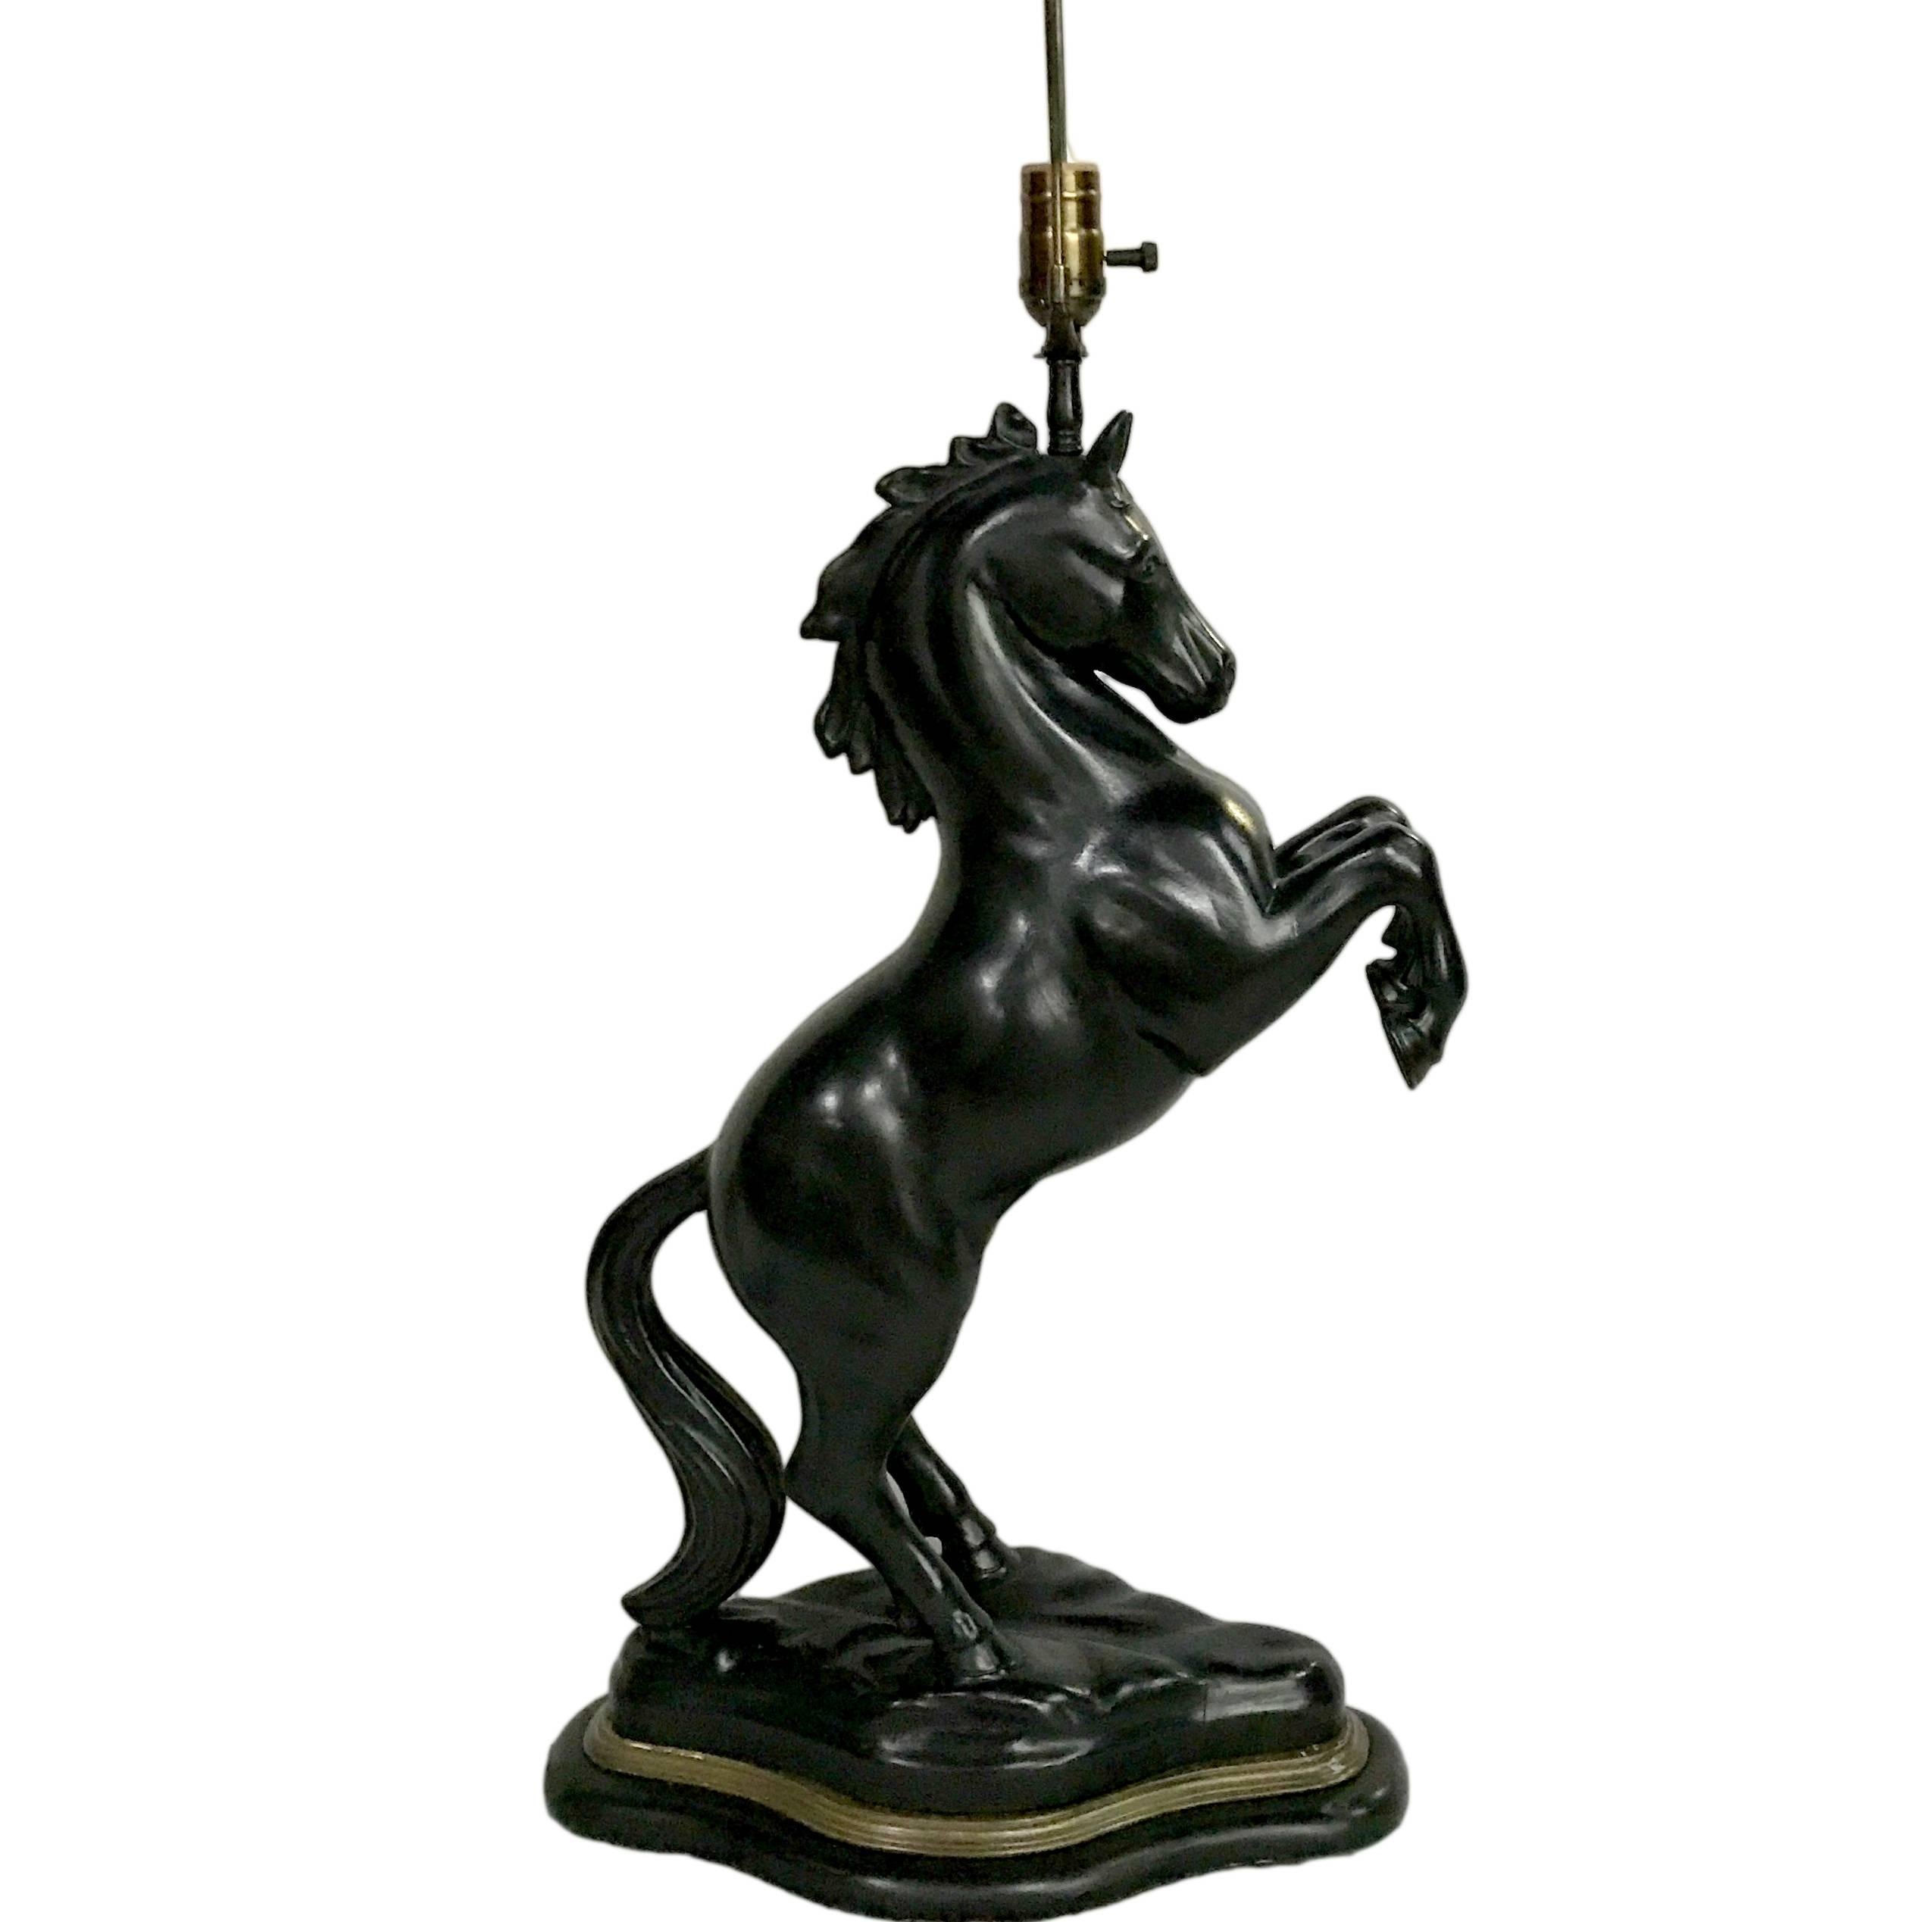 Carved wood horse shaped lamp, painted finish, circa 1910

Measurements:
26